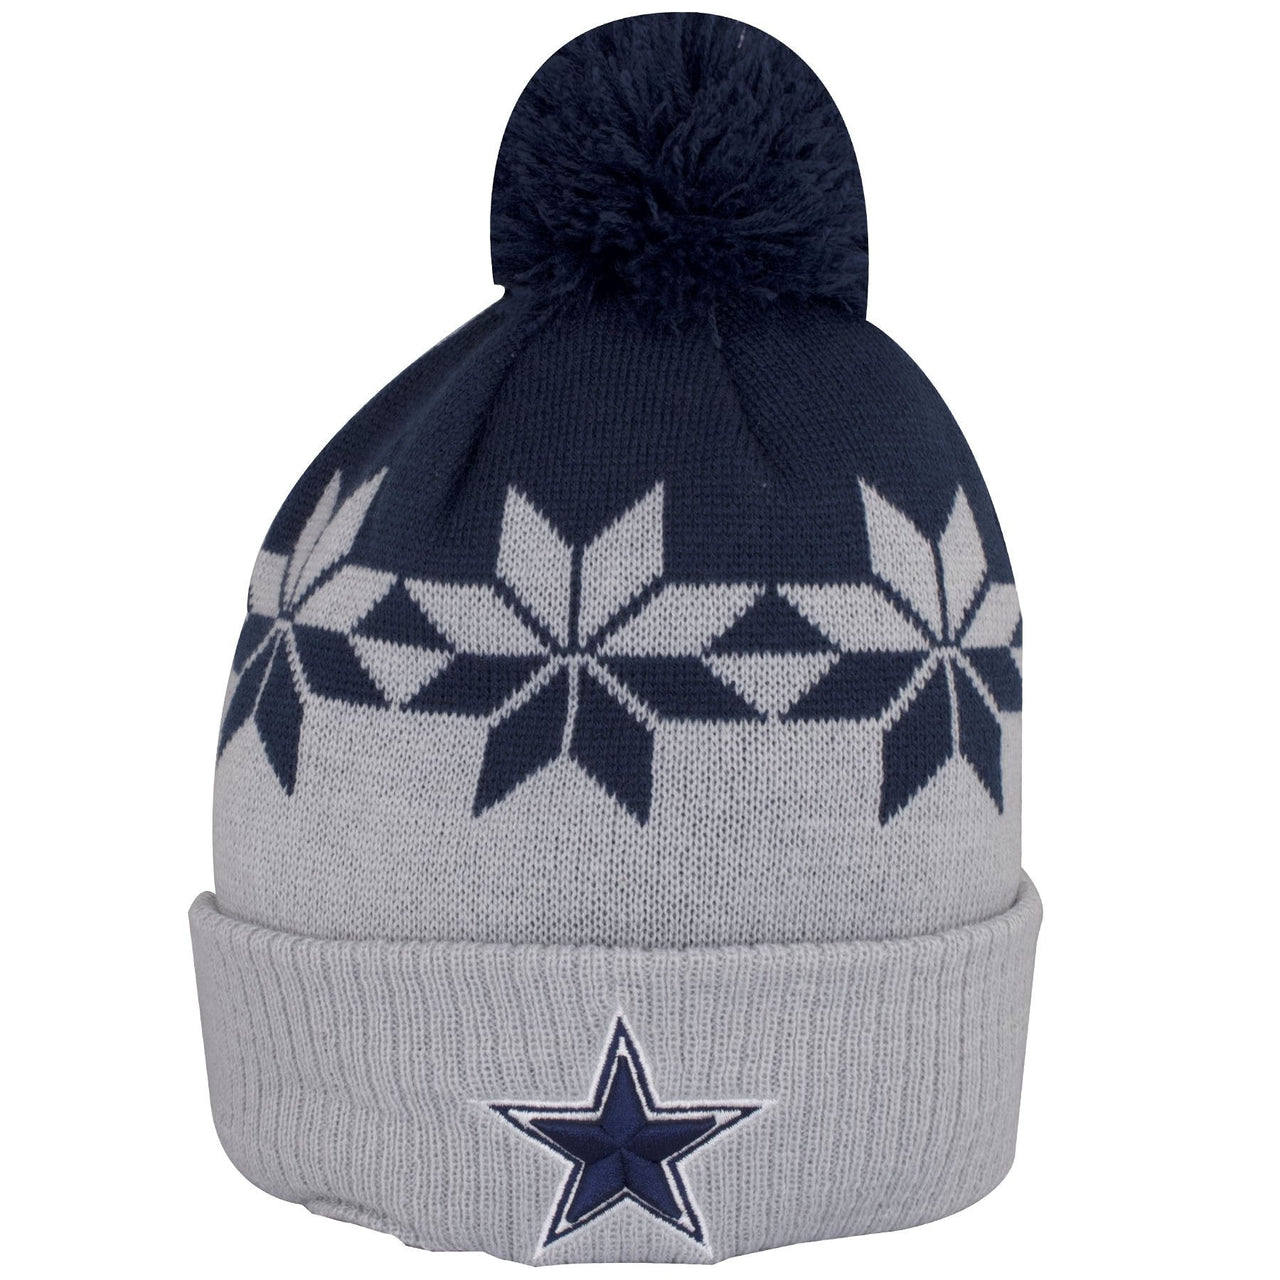 The Dallas Cowboys logo is embroidered on the front of the cuff of this Beanie Dallas Cowboys cap.